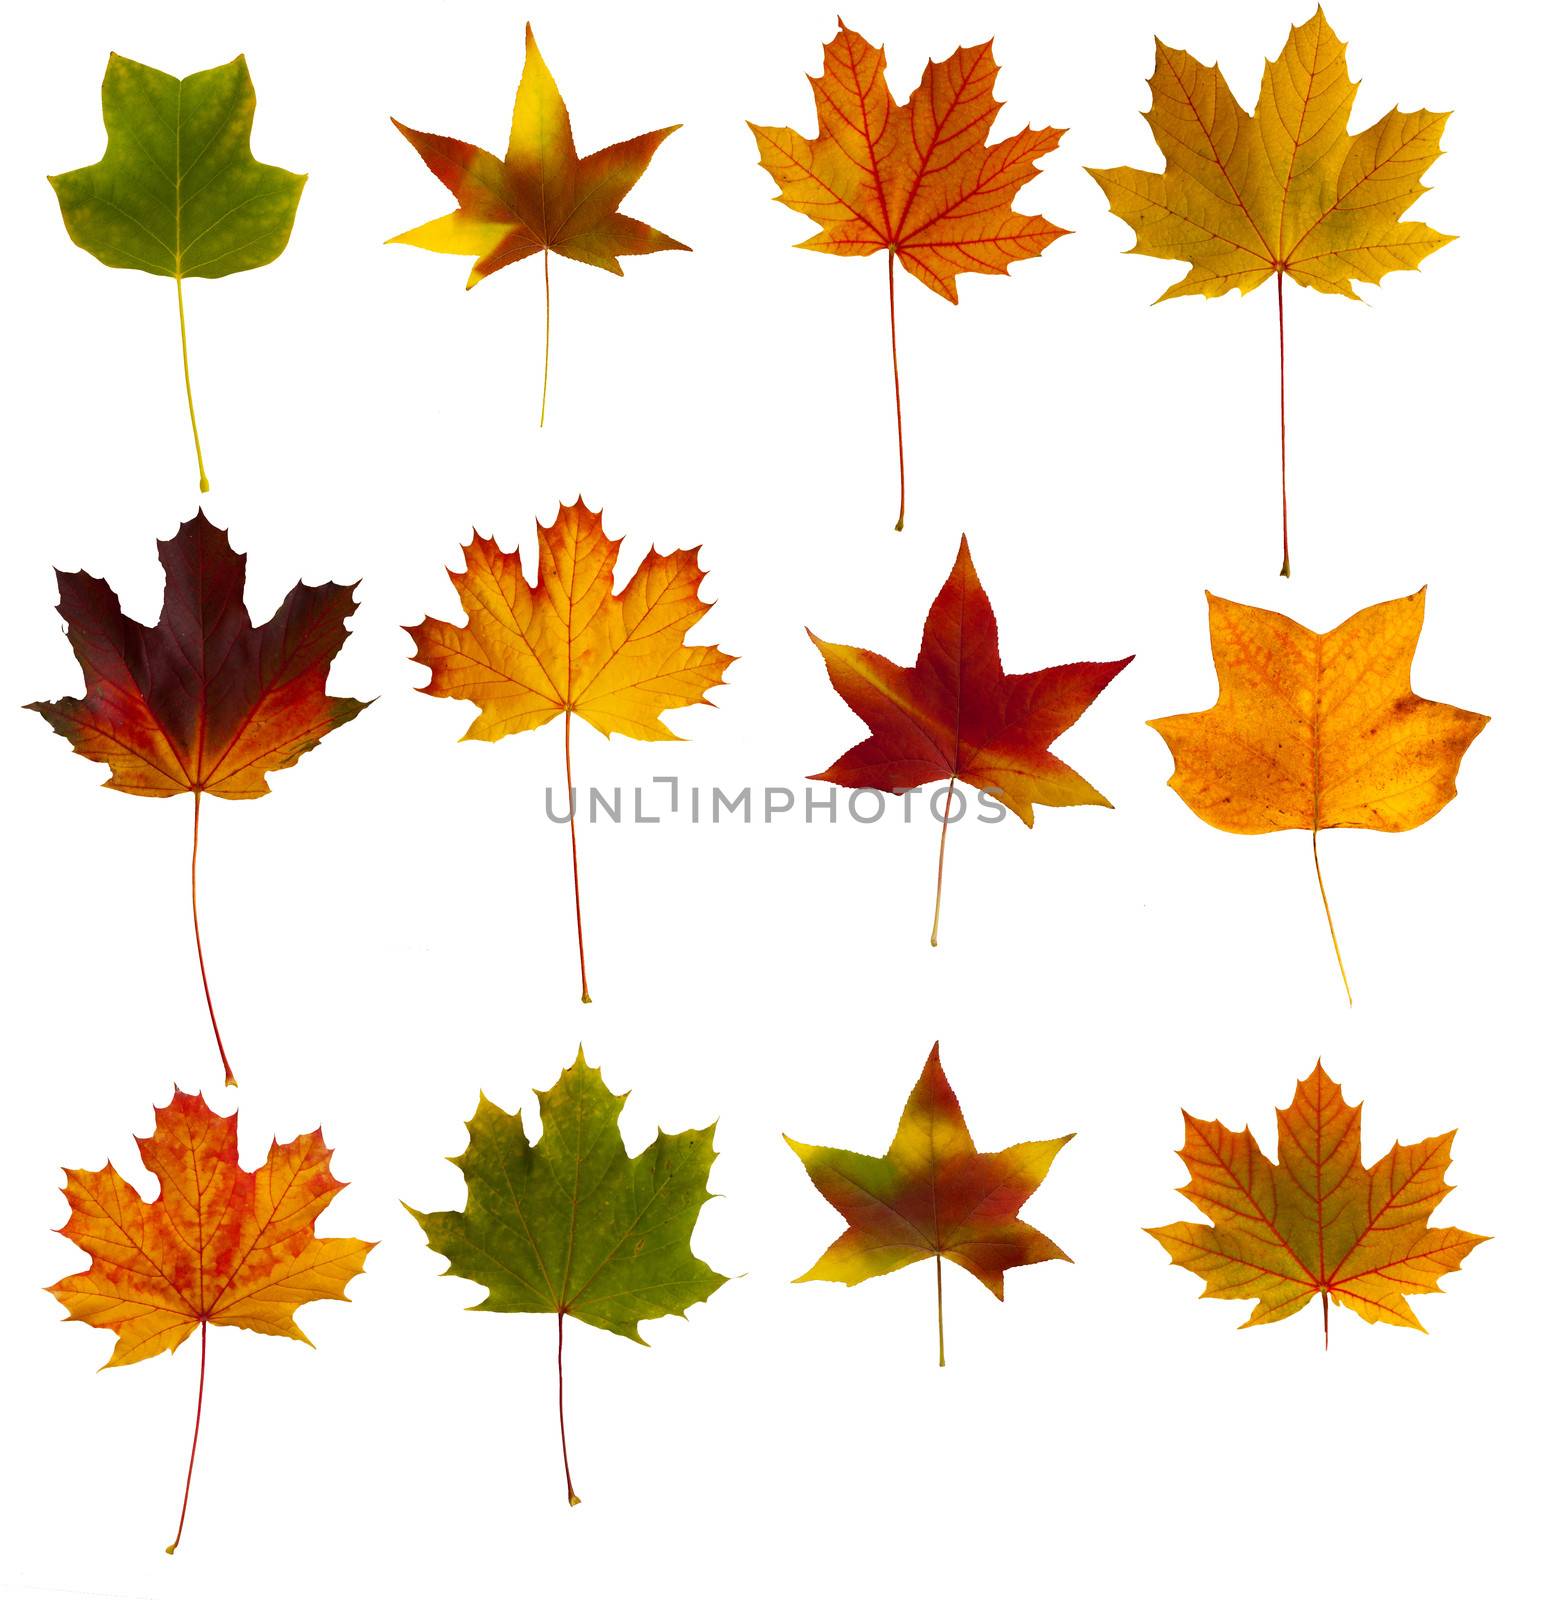 A collection of twelve colorful autumnal leaves